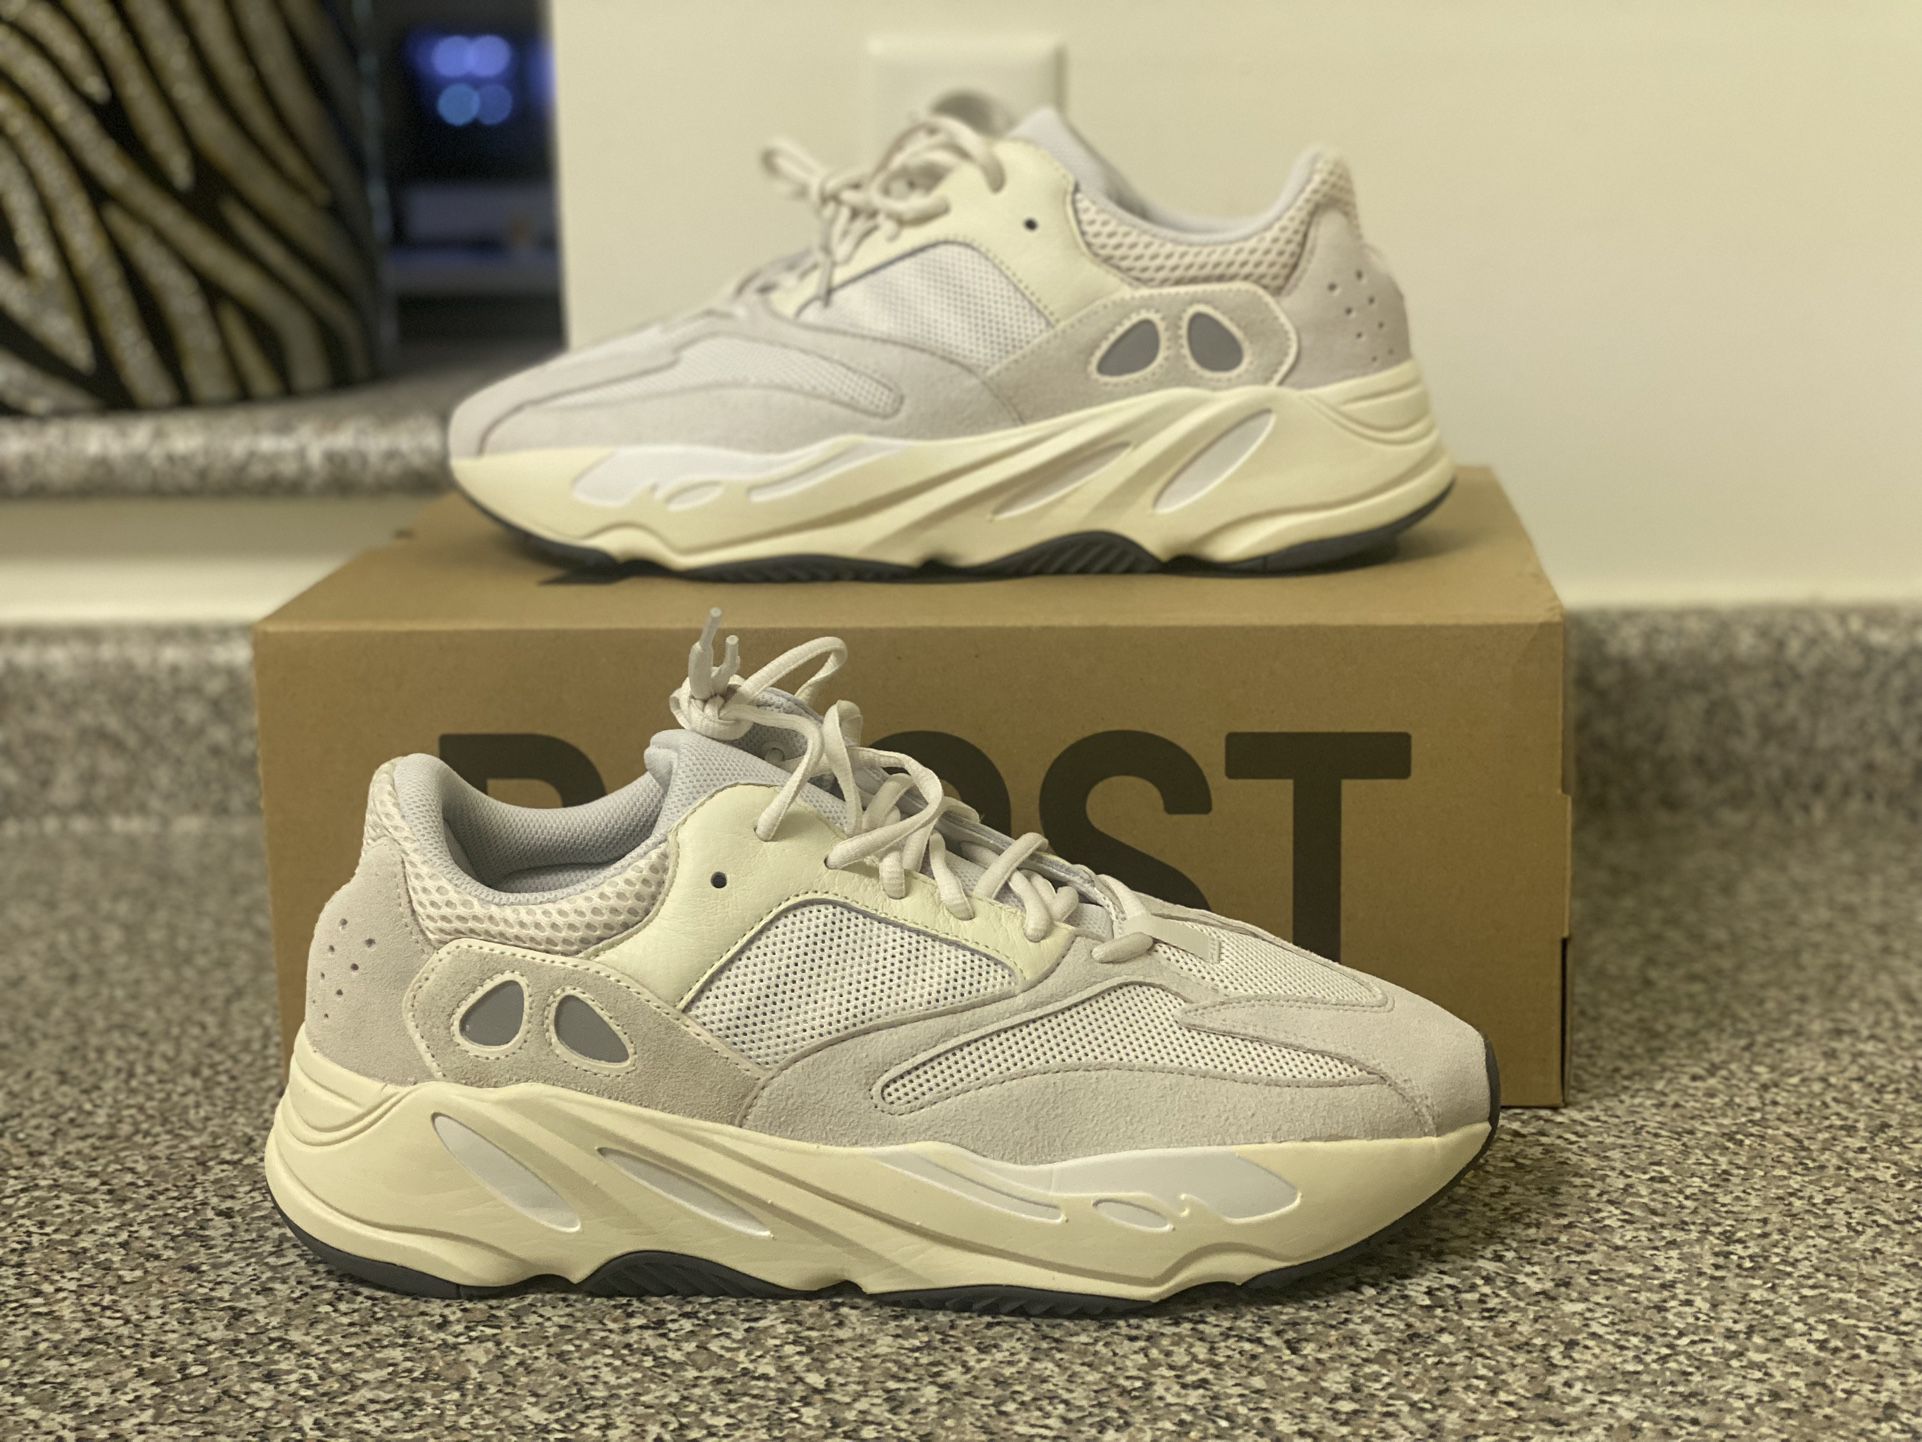 Yeezy 700 - Wave Runners - Sz 9.0 for Sale in Dallas, TX - OfferUp